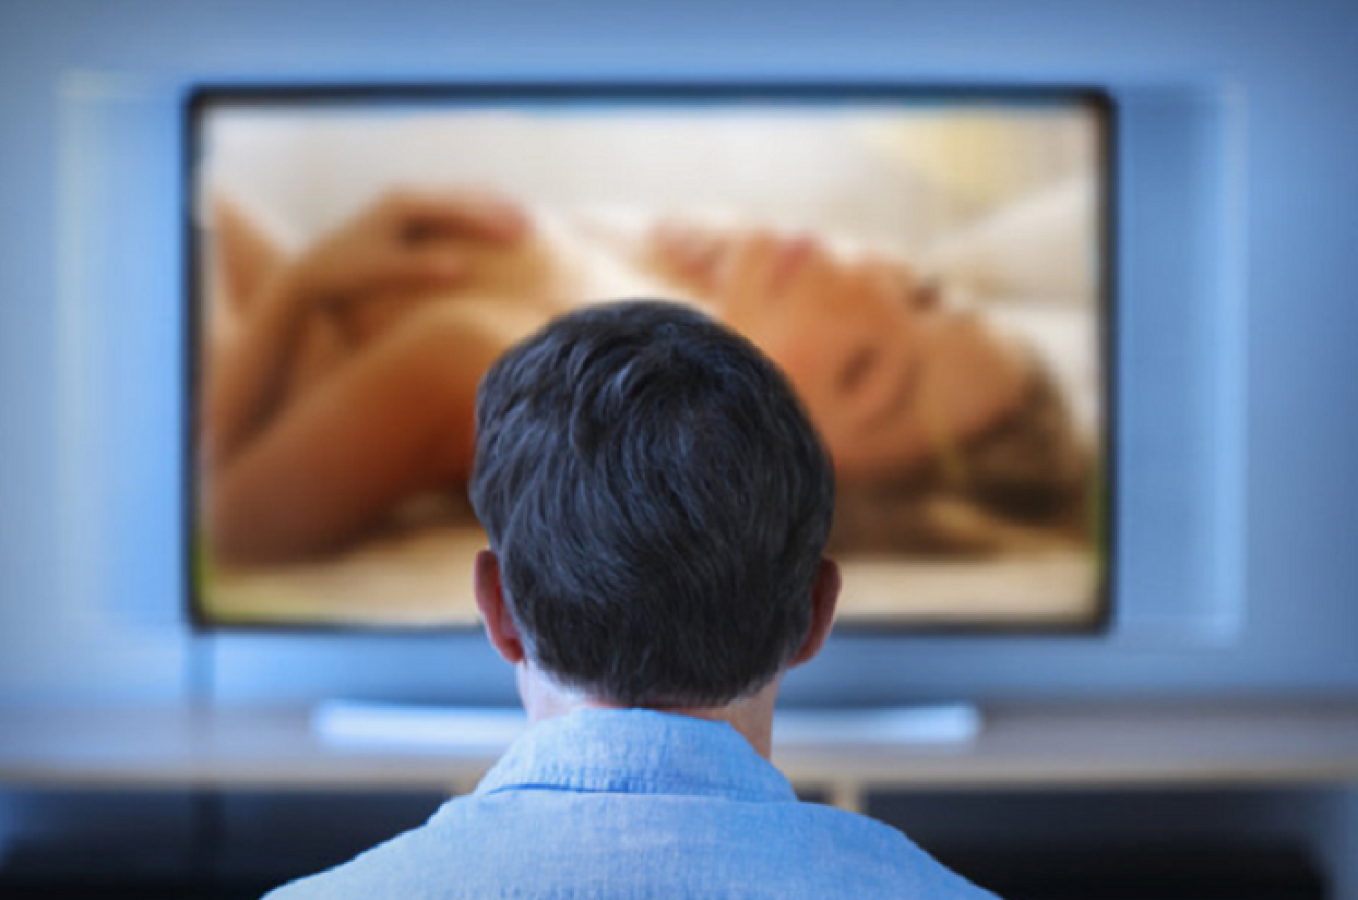 Surat Hidden Porn - Watching porn on smart TV cause trouble to husband-wife, Hacker ...